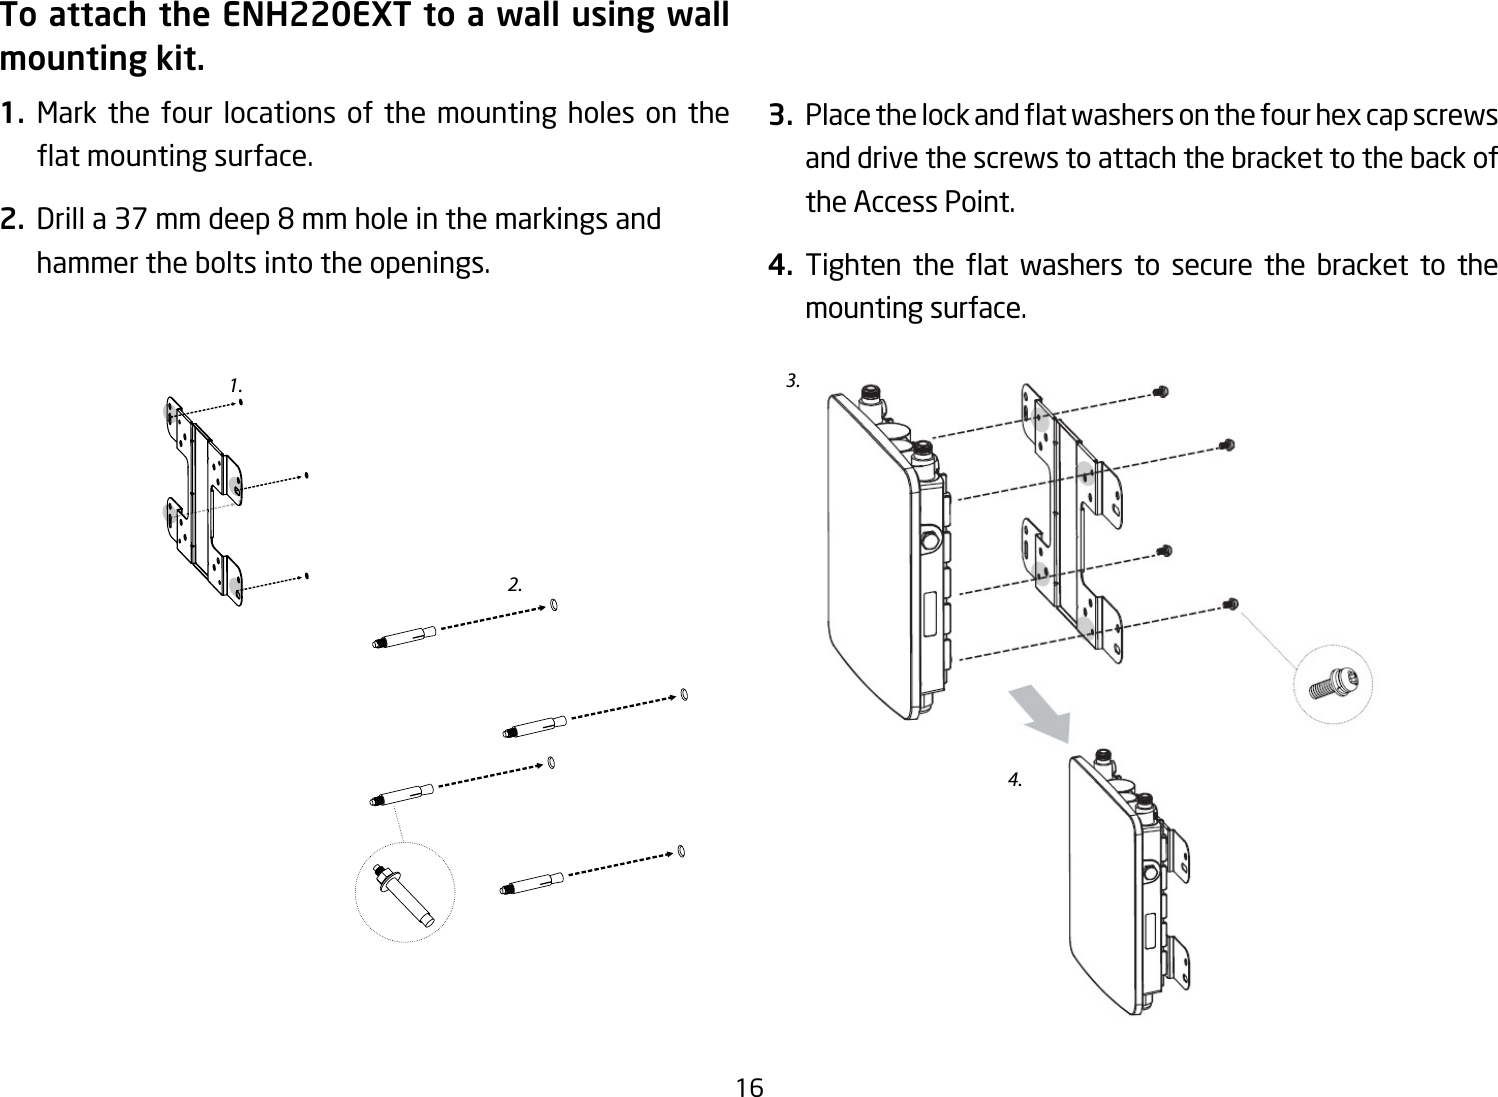 16To attach the ENH220EXT to a wall using wall mounting kit.1.  Mark the four locations of the mounting holes on the atmountingsurface.2. Drilla37mmdeep8mmholeinthemarkingsandhammer the bolts into the openings.3. Placethelockandatwashersonthefourhexcapscrewsand drive the screws to attach the bracket to the back of the Access Point.4. Tighten the at washers to secure the bracket to themounting surface.2.3.4.1.